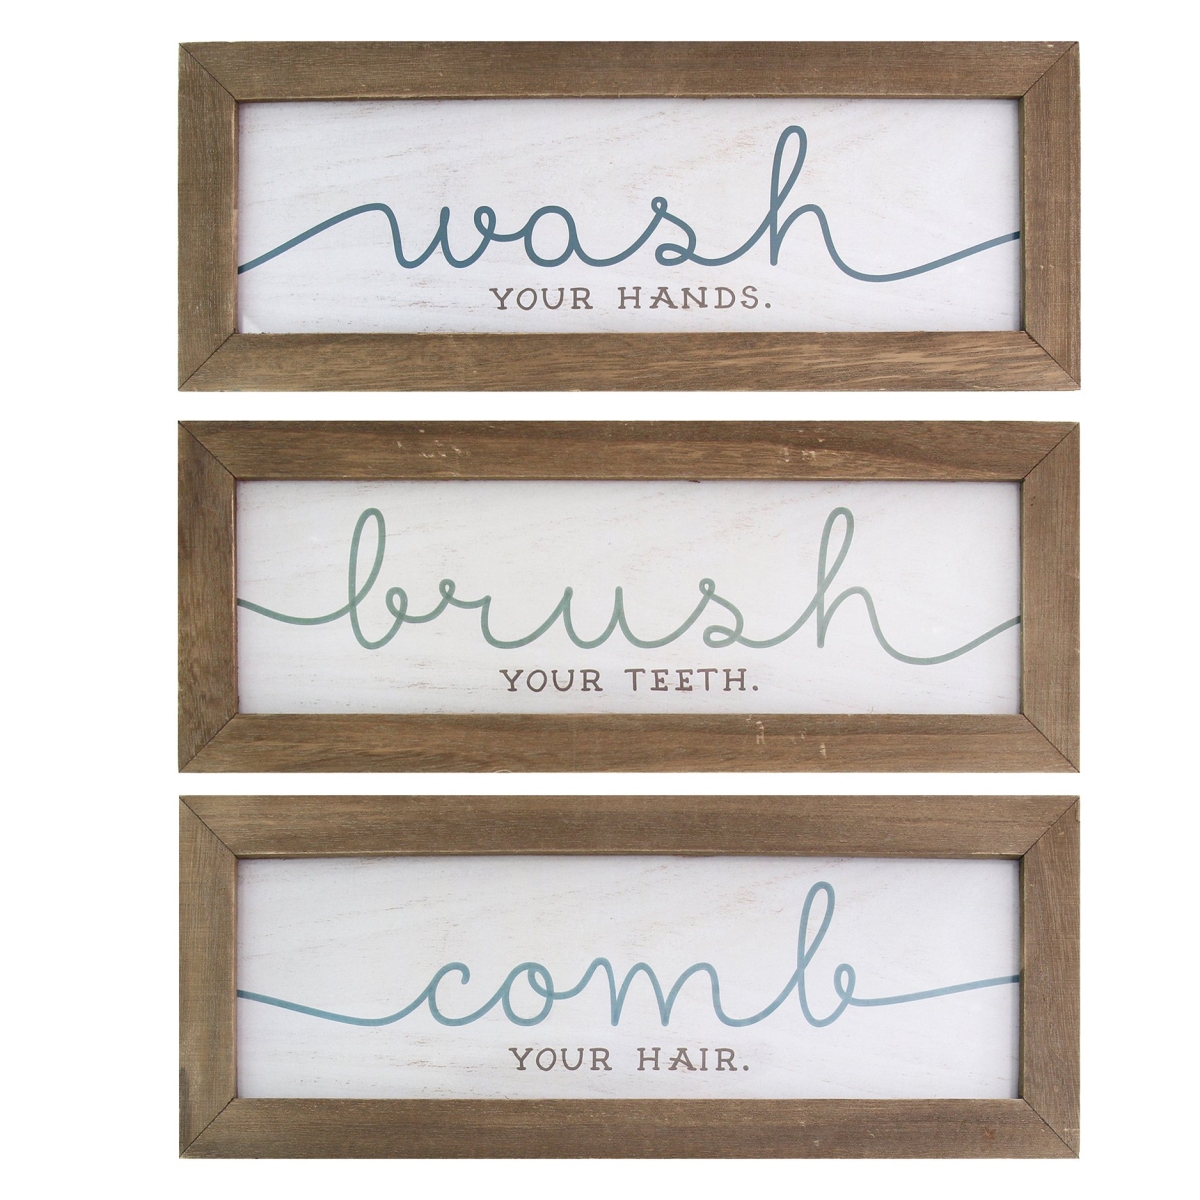 Home Roots 321254 Wash Brush Comb Bath Art, Natural Wood, White & Blue - Set Of 3